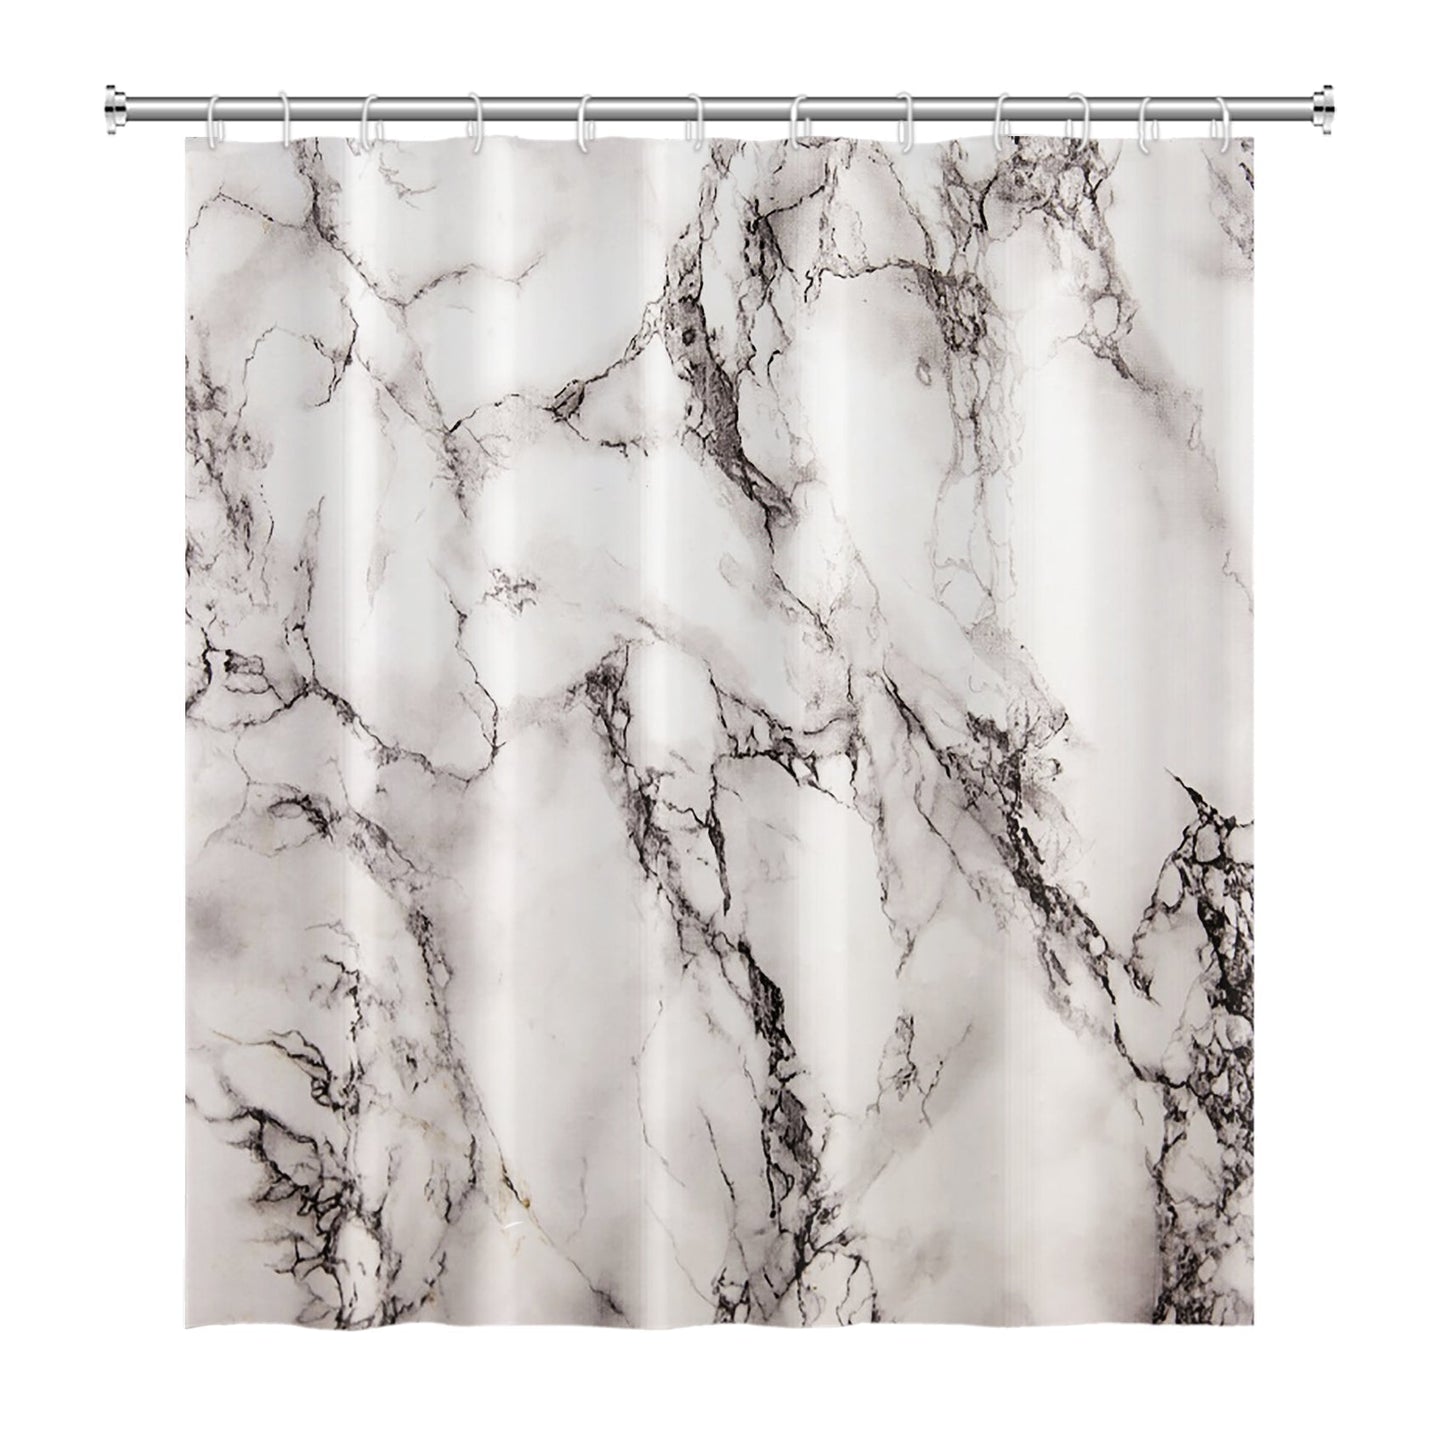 Feblilac Grey and Yellow Marble Pattern Texture Shower Curtains with Hooks, Bathroom Curtains with Ring, Unique Bathroom décor, Boho Shower Curtain, Customized Bathroom Curtains, Extra Long Shower Curtain, Abstract Blue and Purple Gradient Bathroom